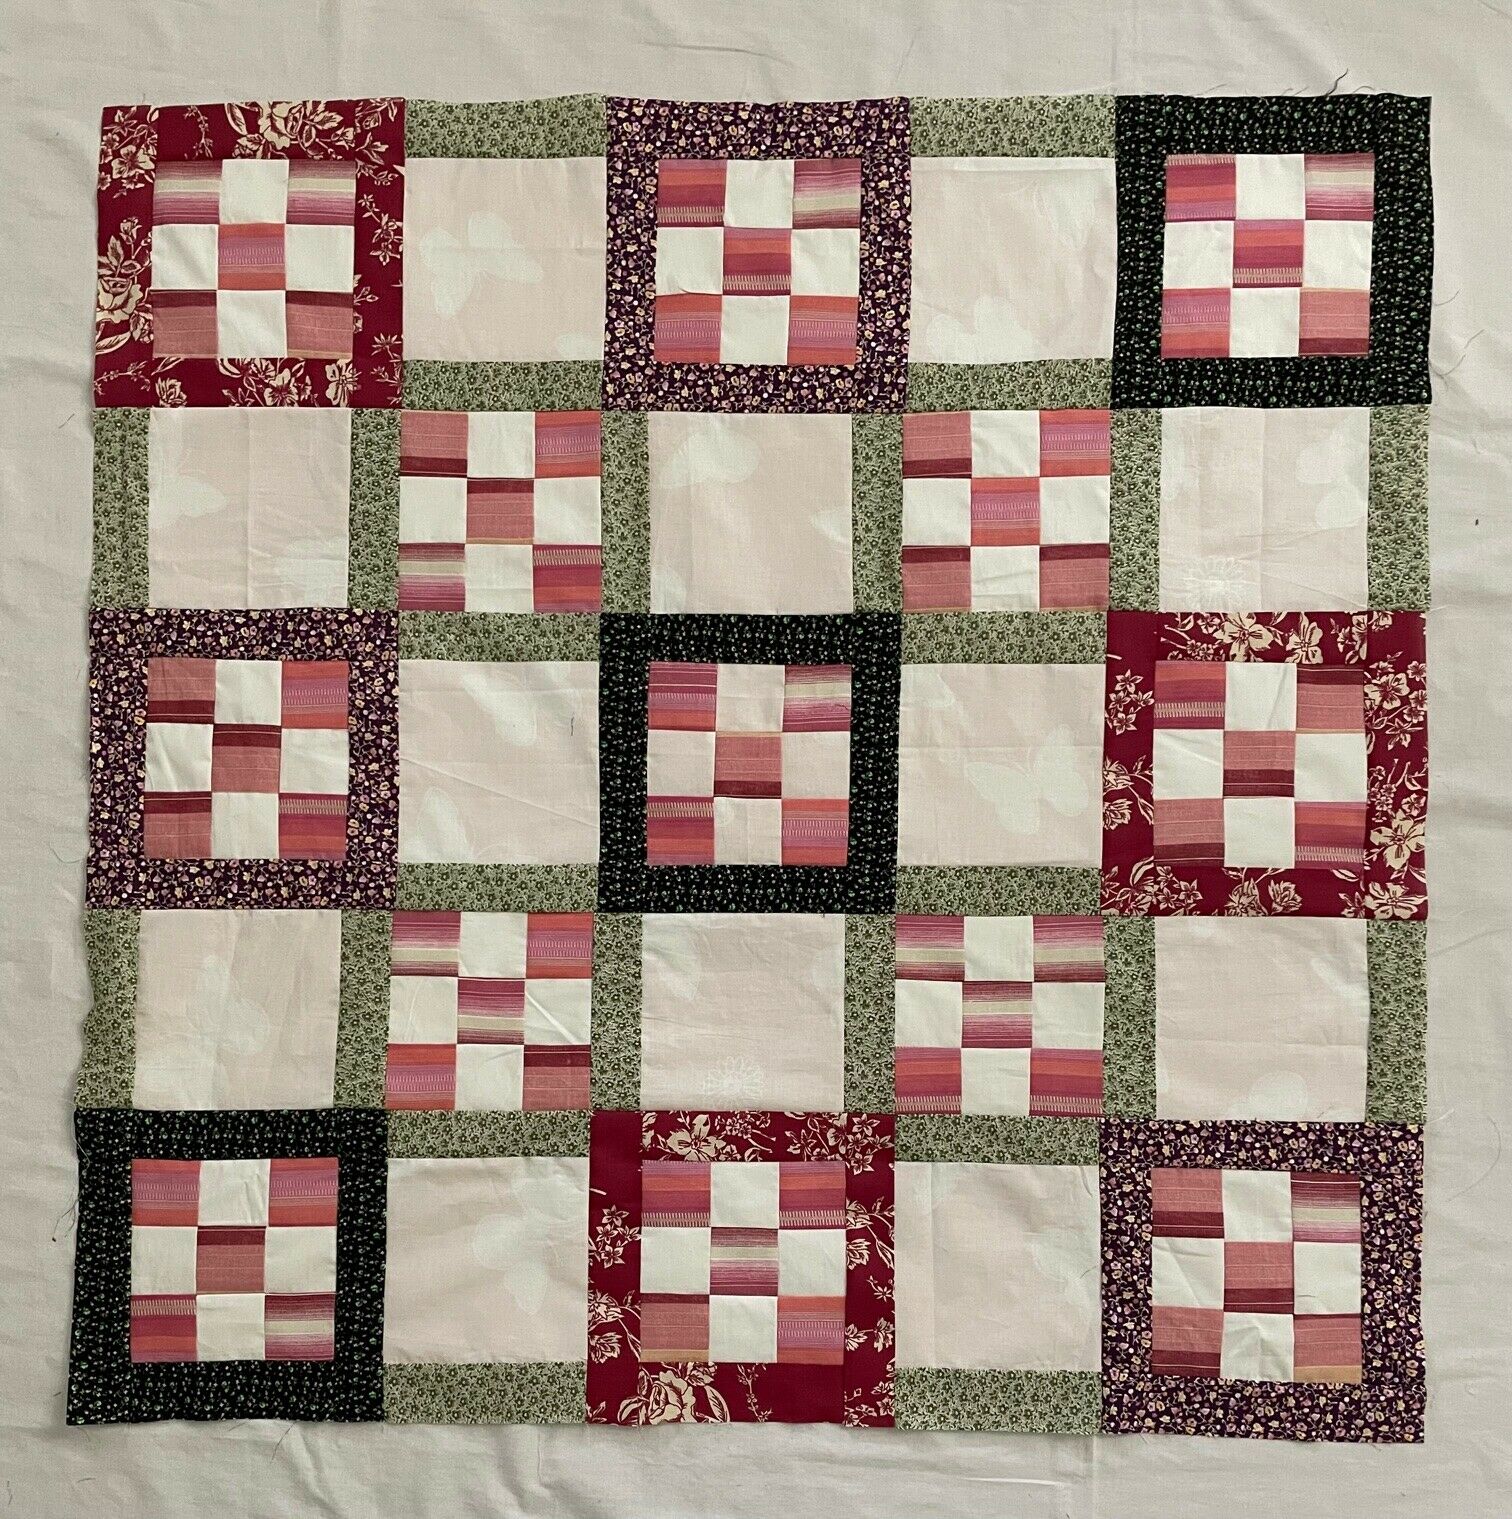 New Lap/crib Size Pieced Patchwork Quilt Top, 39" X 39"